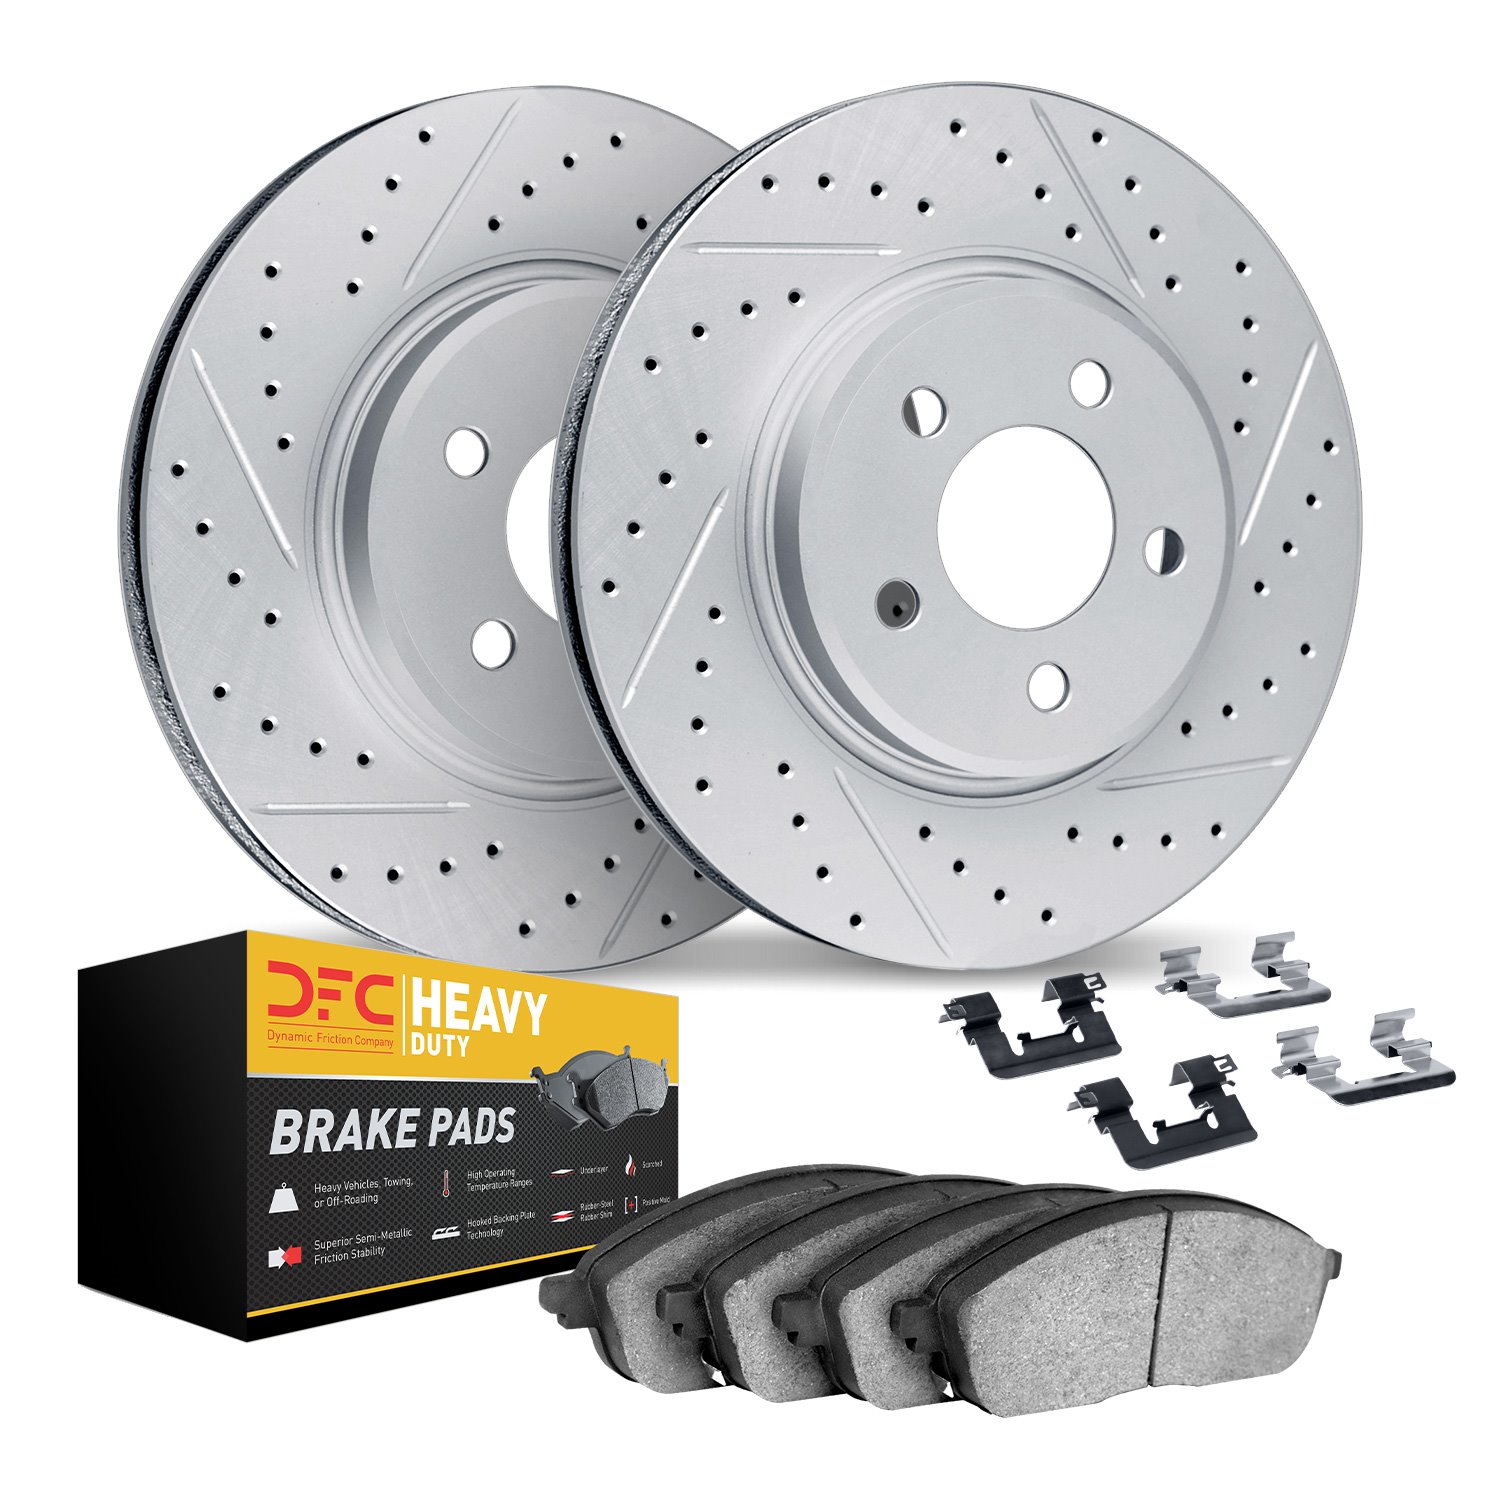 2212-99144 Geoperformance Drilled/Slotted Rotors w/Heavy-Duty Pads Kit & Hardware, 2004-2006 Ford/Lincoln/Mercury/Mazda, Positio